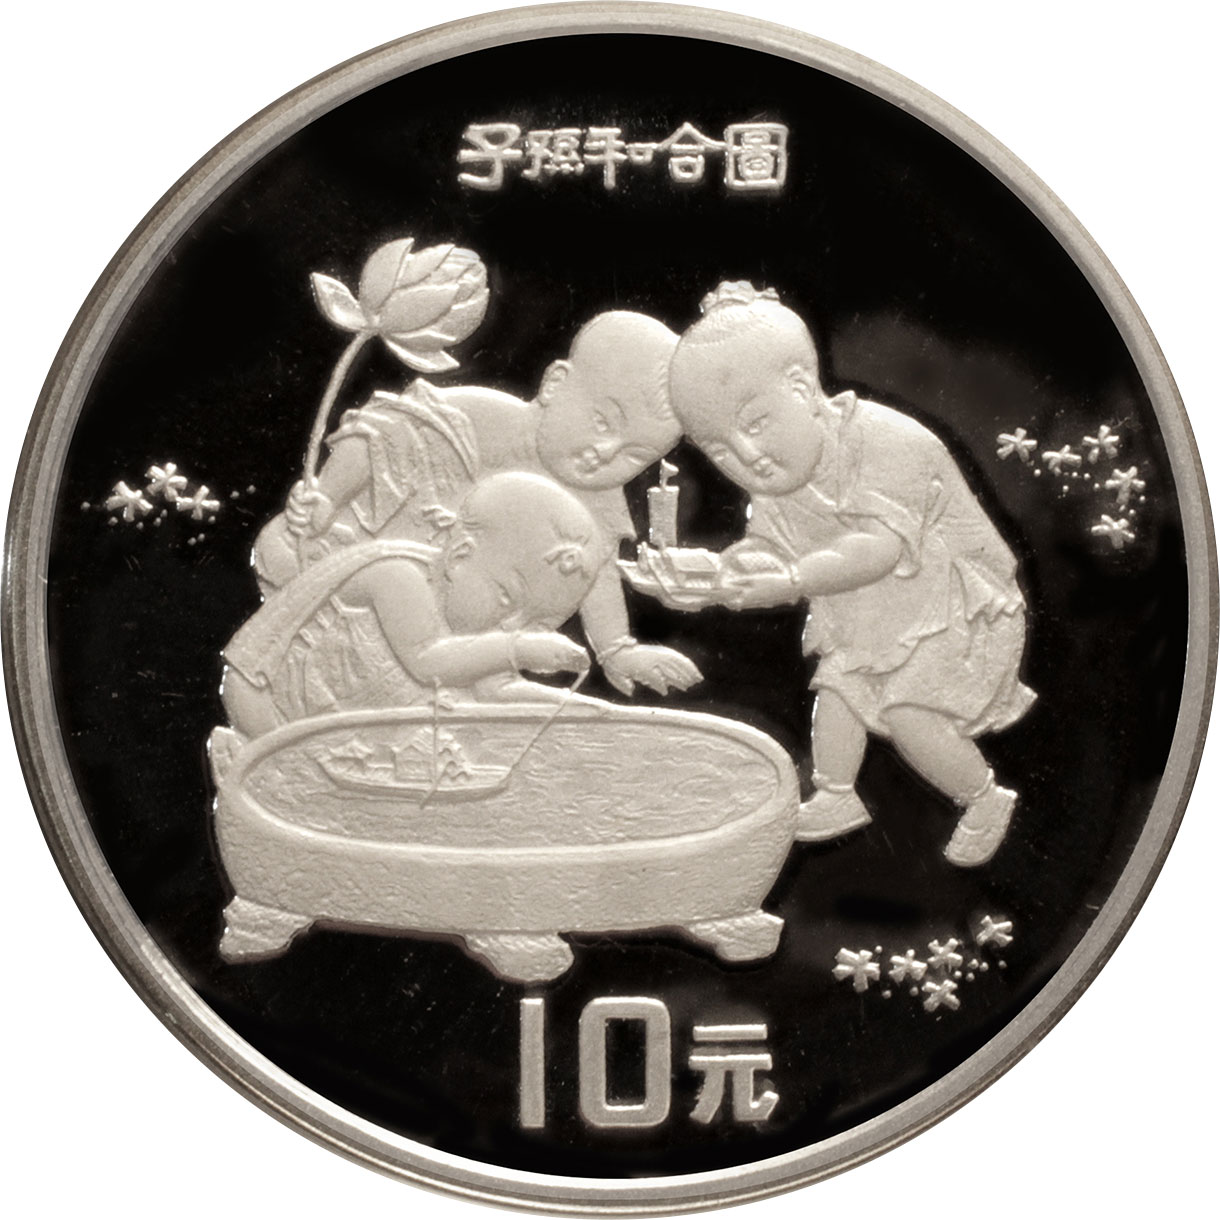 China's Spacecraft to the Moon China 2007 Silver 1 Oz Coin